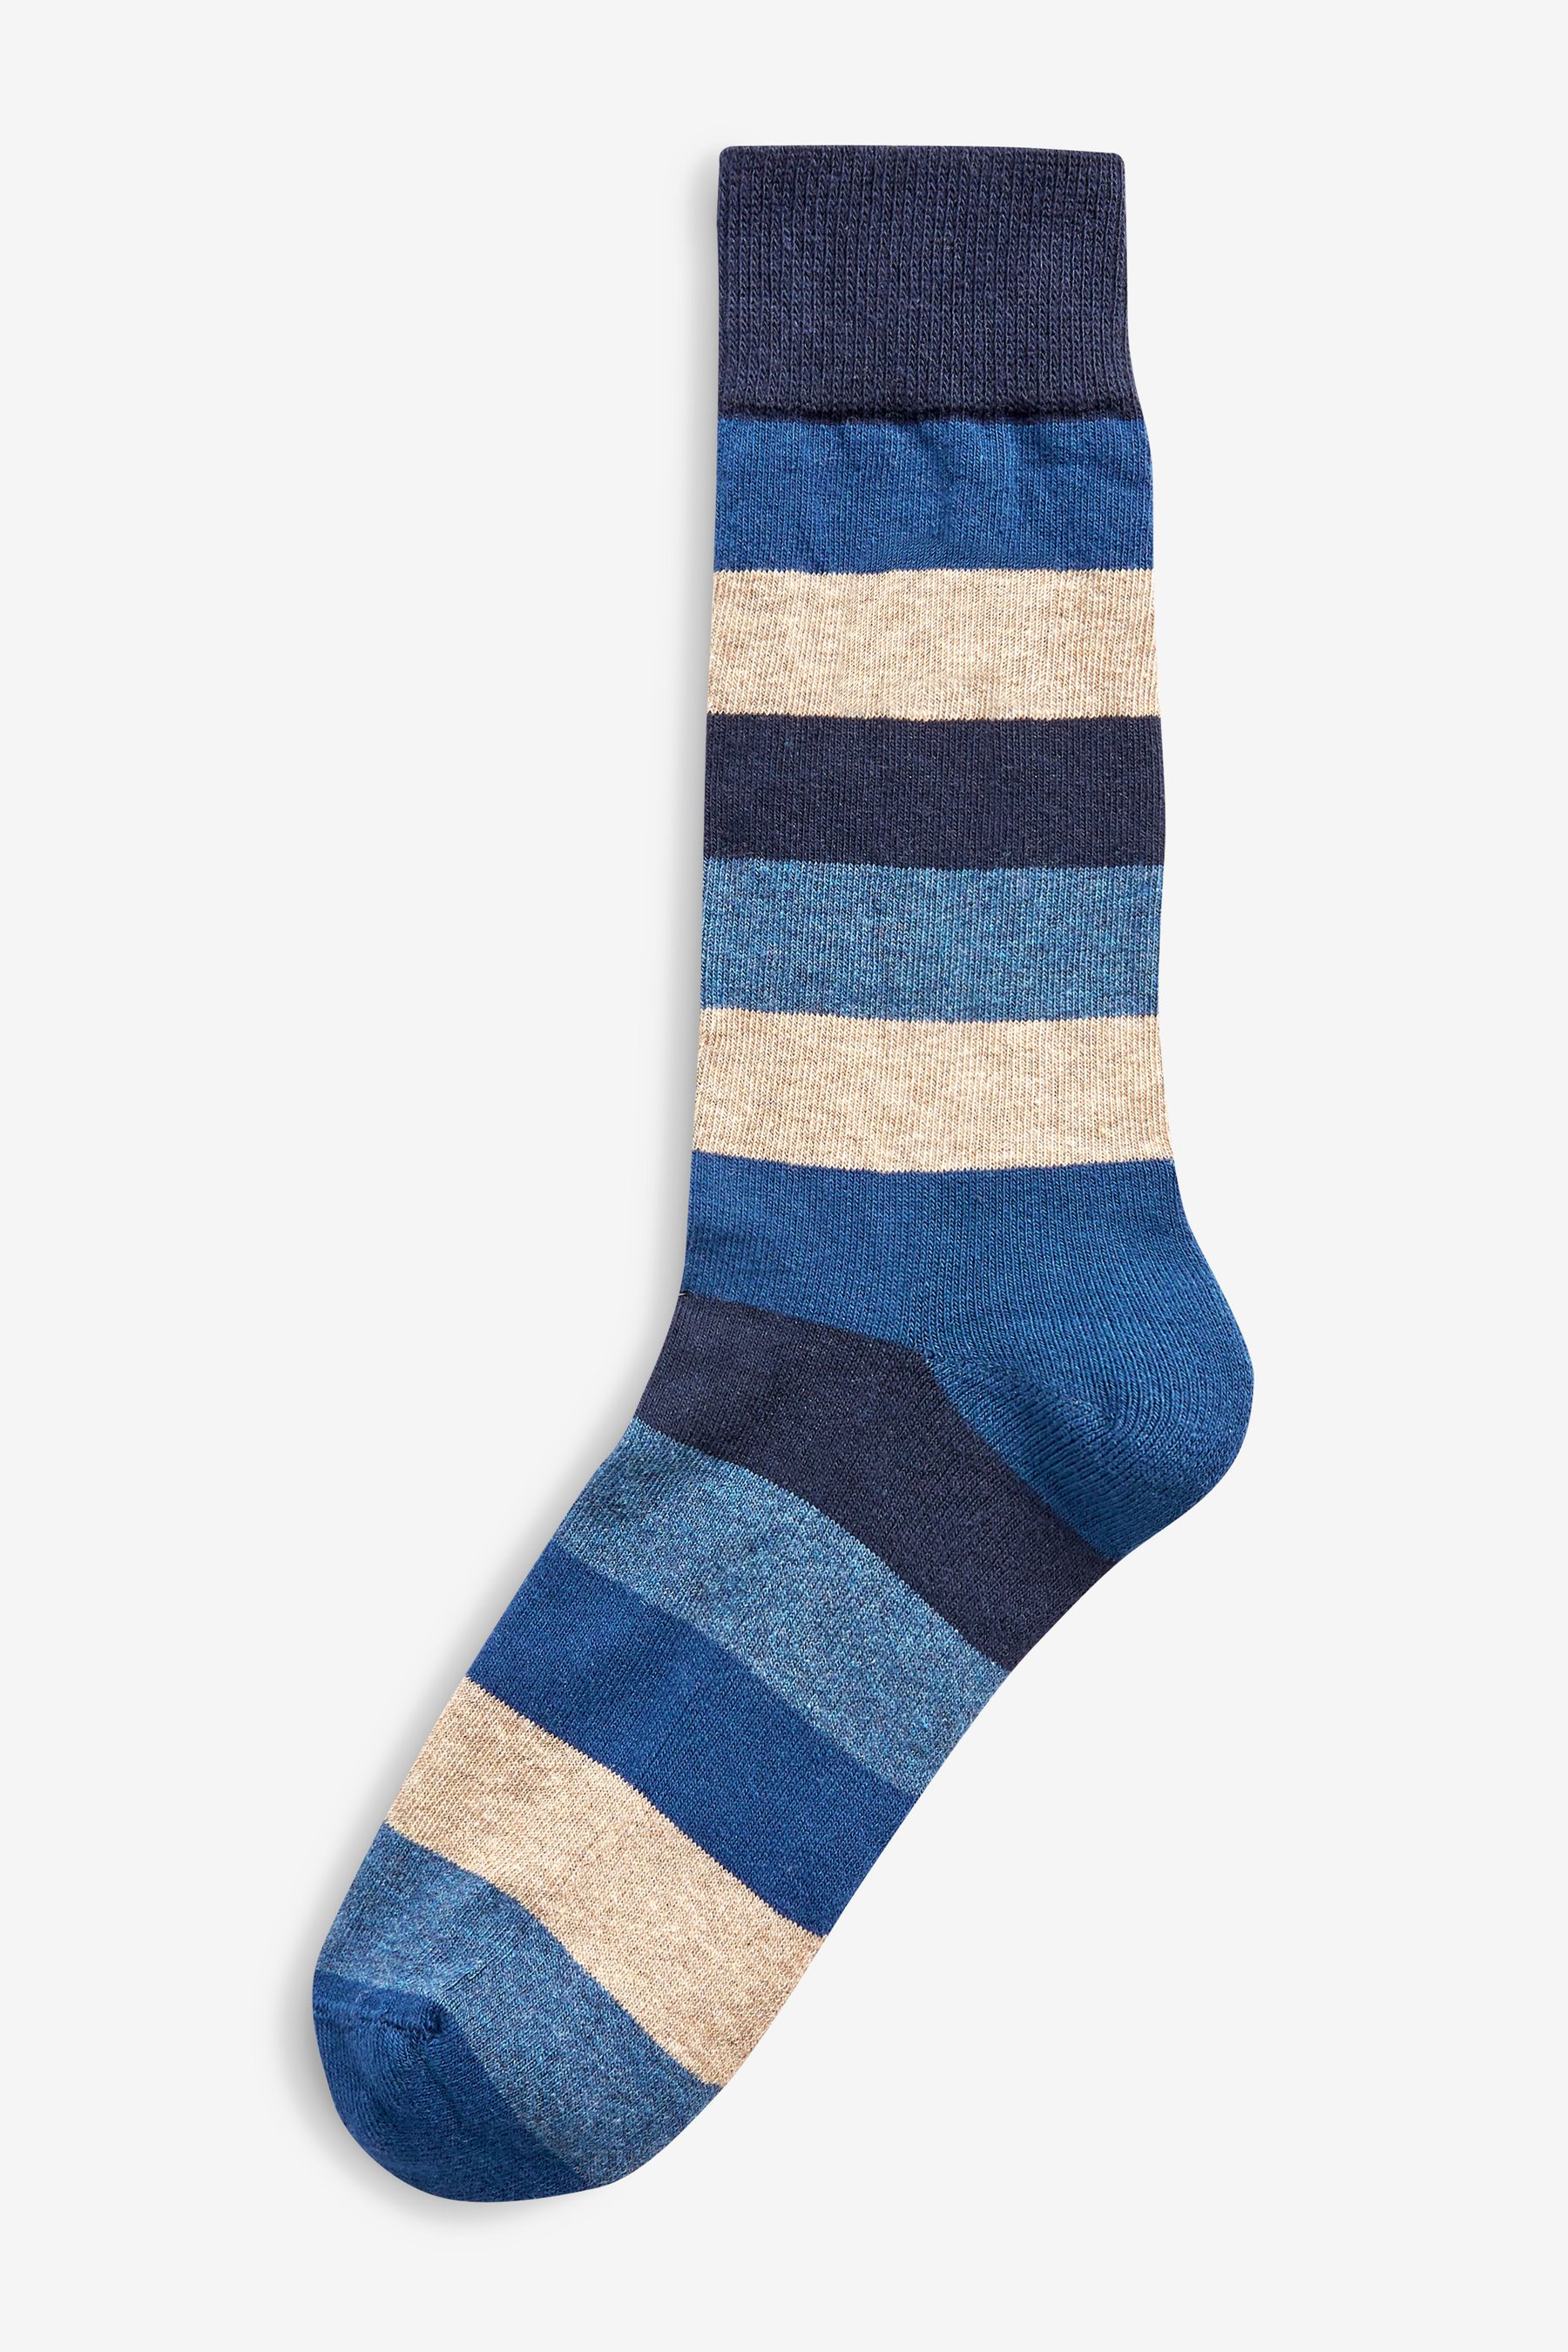 Buy Stripe 5 Pack Cushioned Sole Comfort Socks from the Next UK online shop